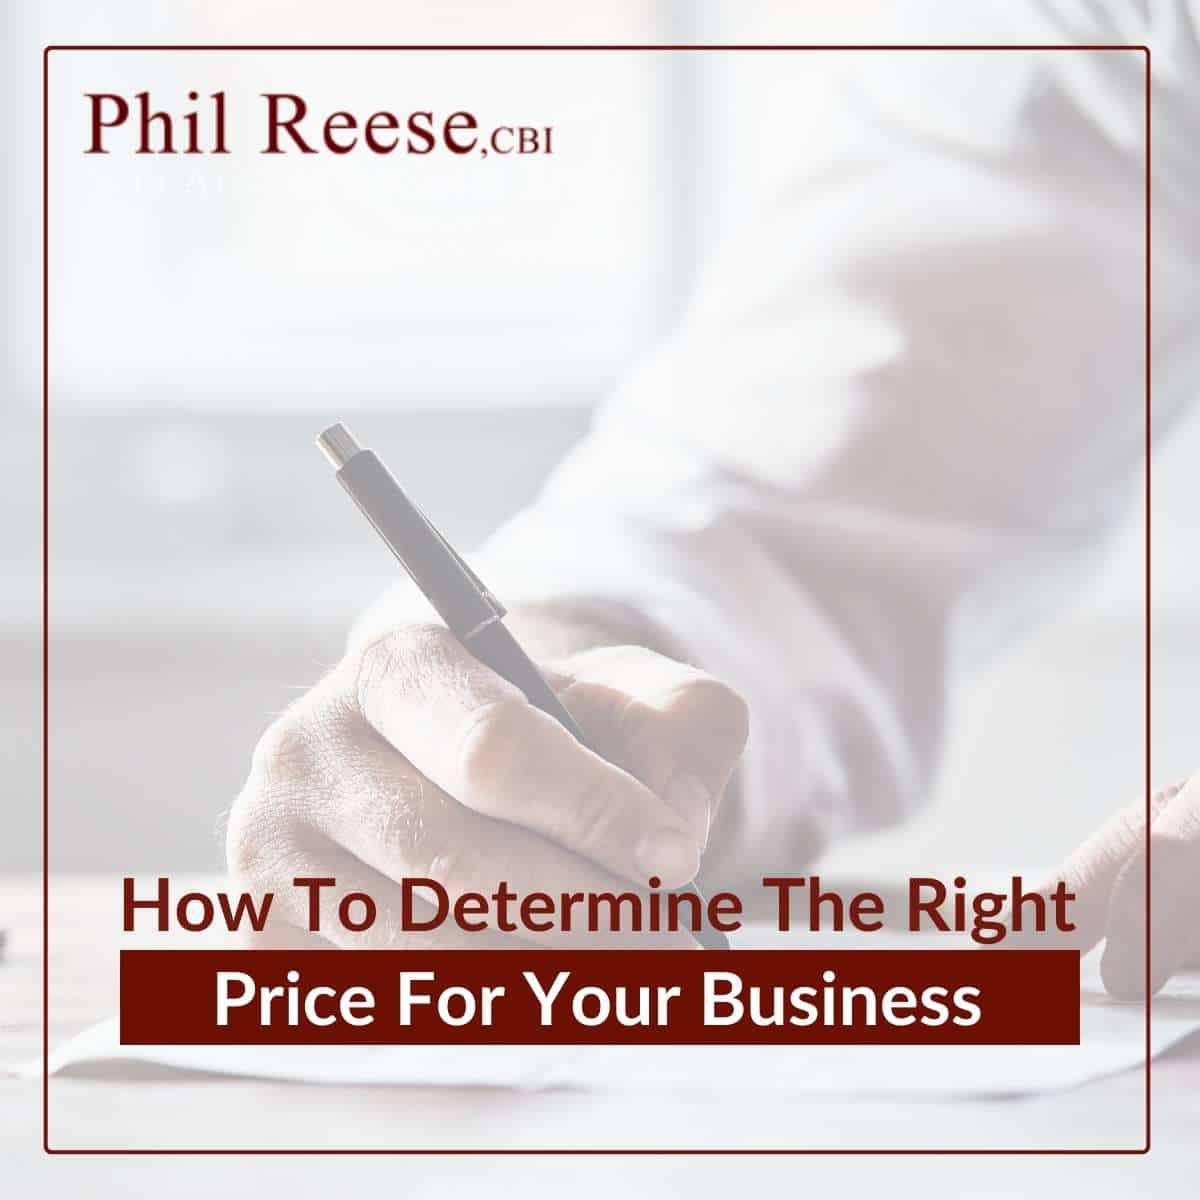 How To Determine The Right Price For Your Business